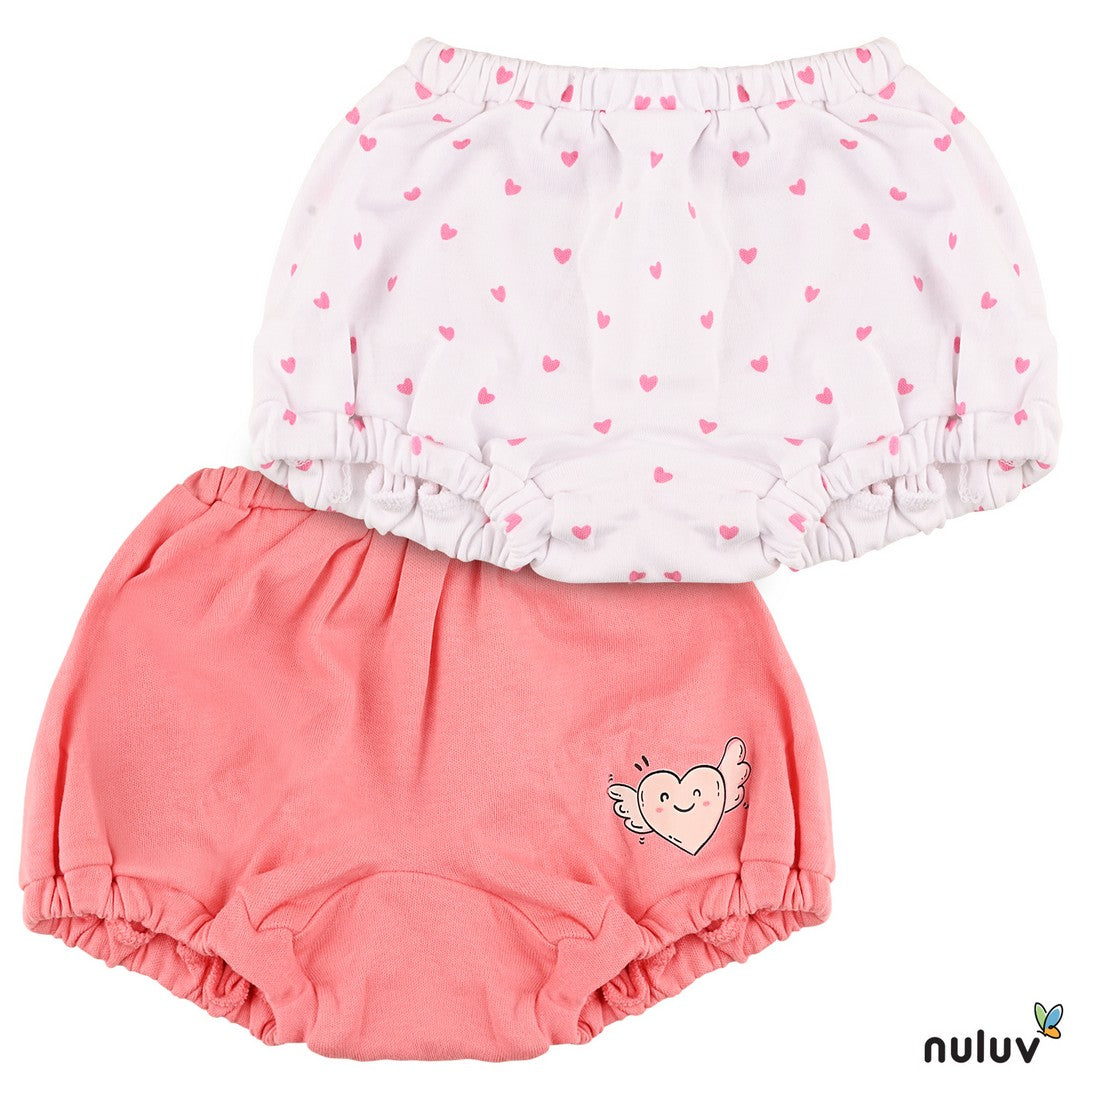 Nuluv Girl's Panty - Style Bloomer